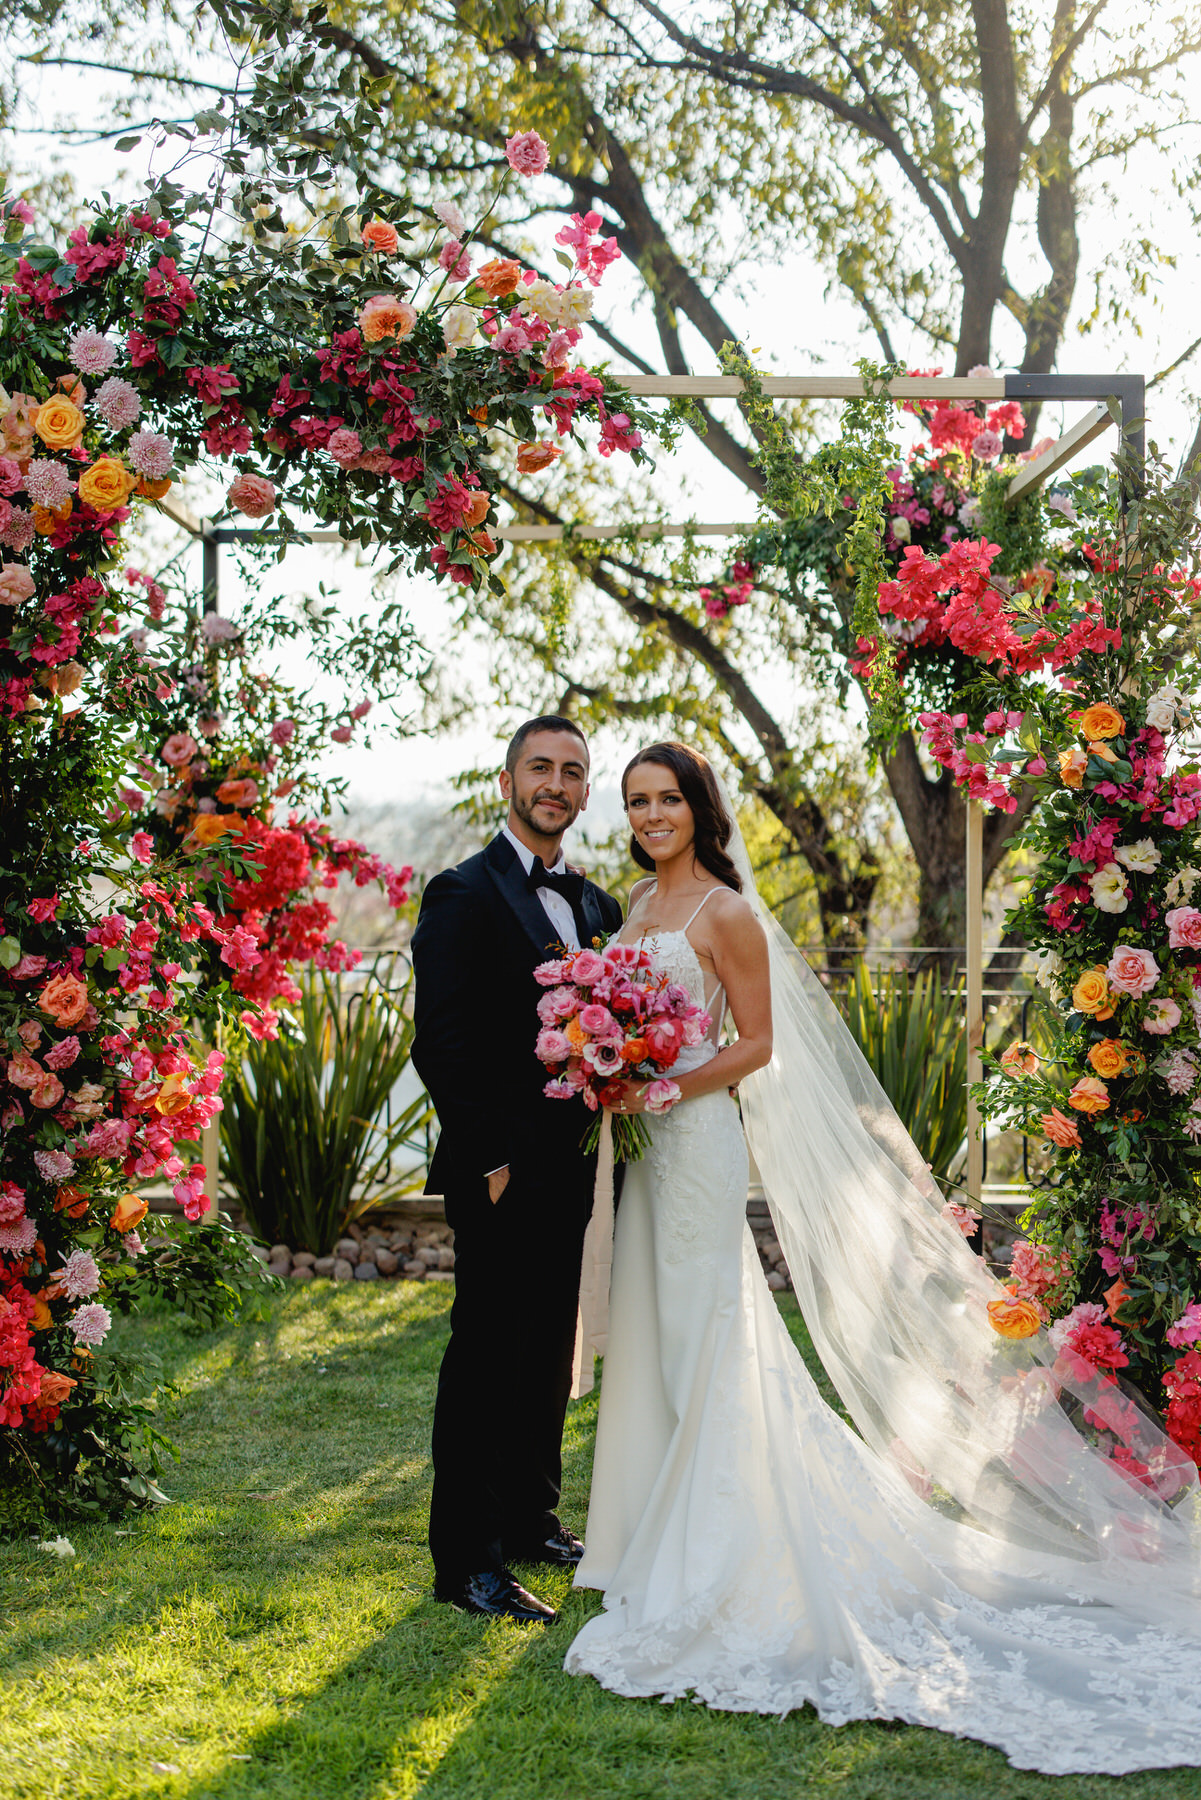 Stunning couple in floral arch in San Miguel de Allende, Mexico